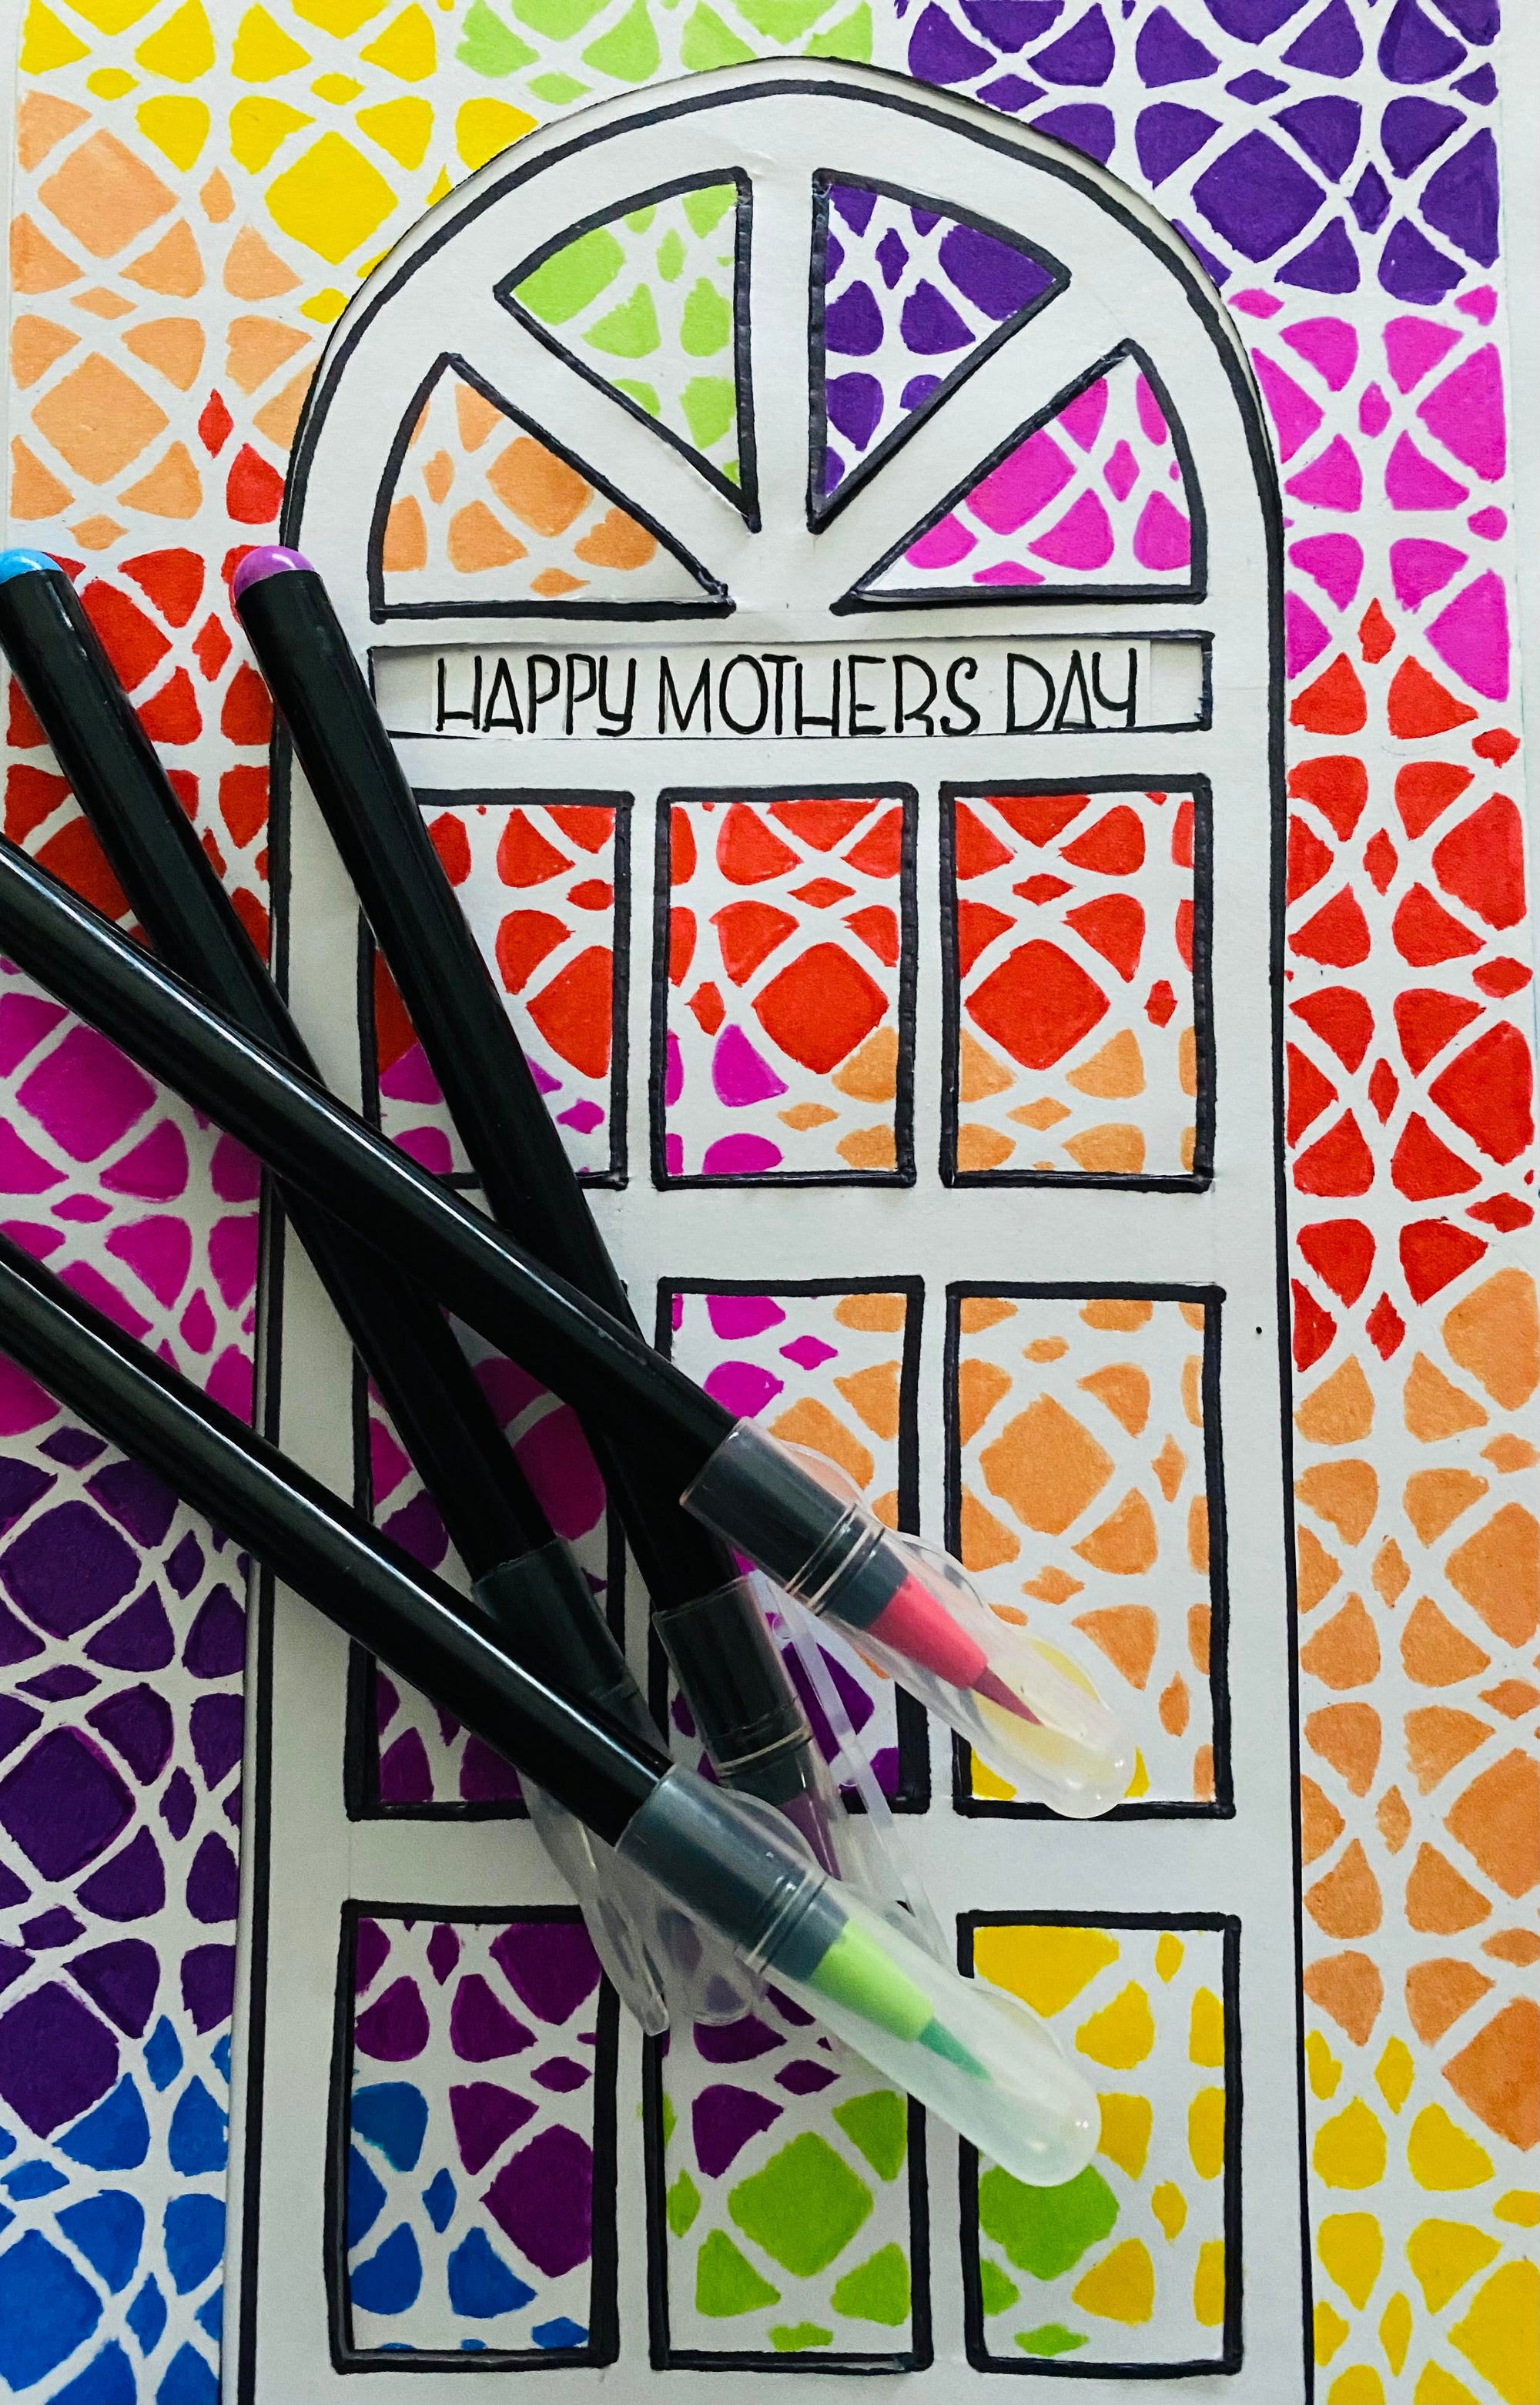 Handmade card for Mother's day with a secret message just for mum!